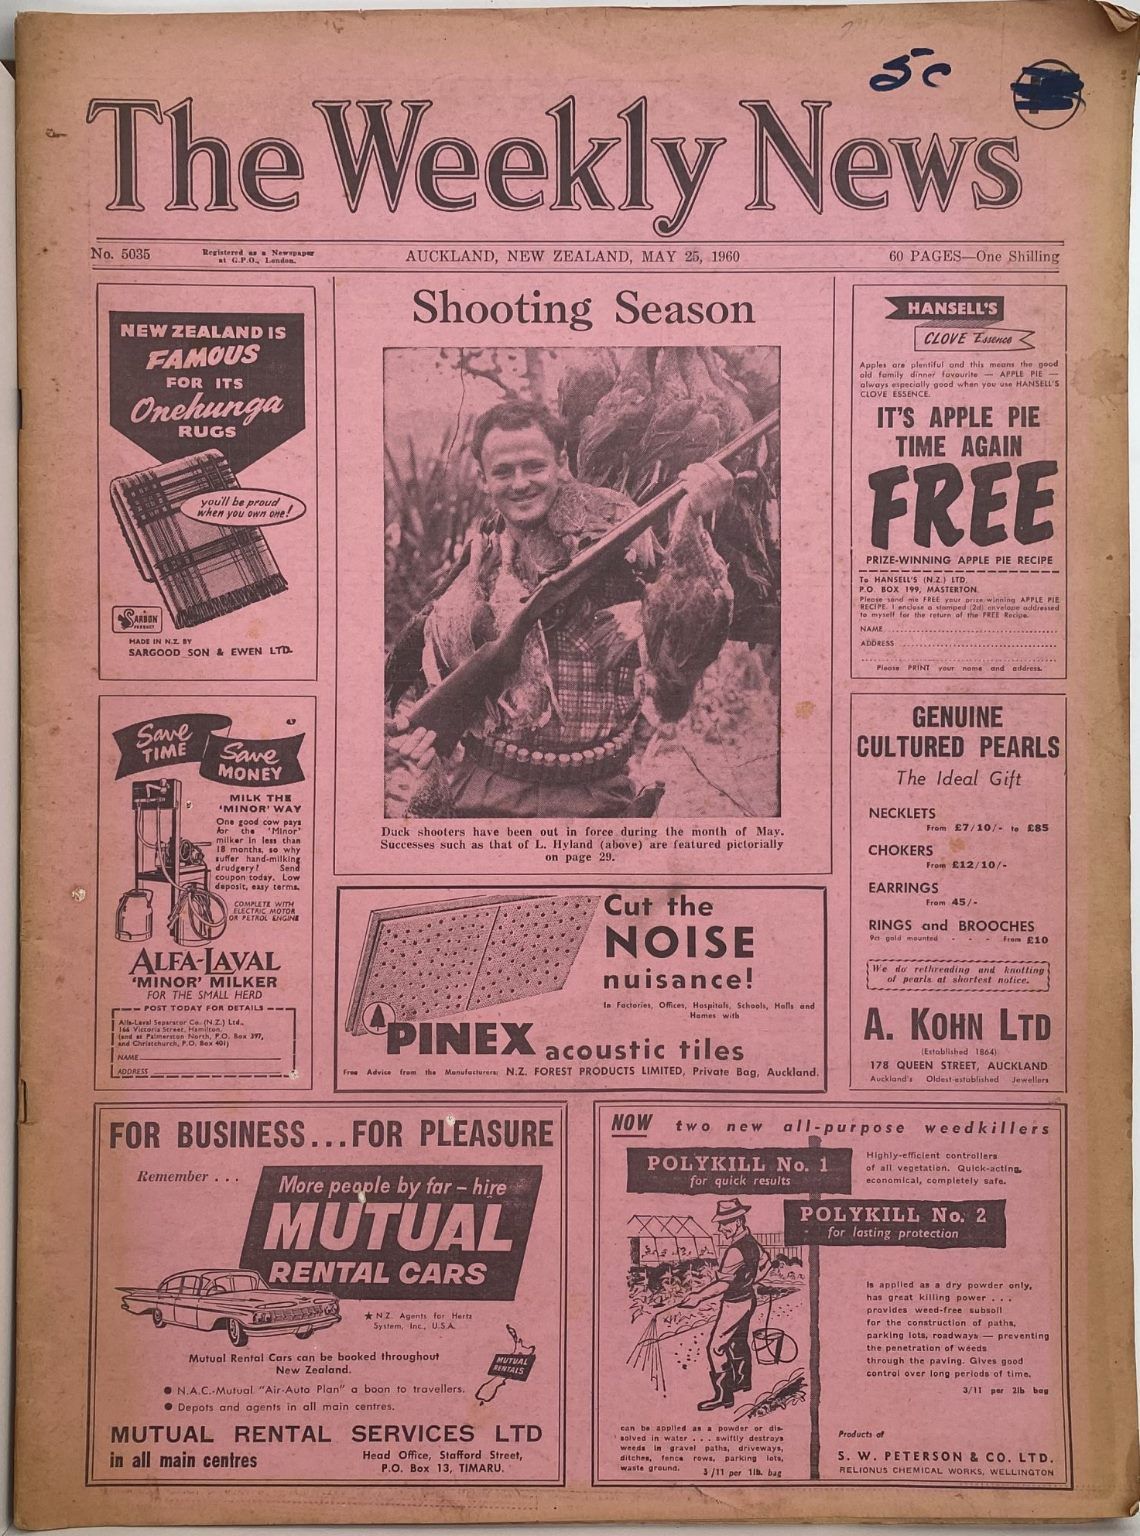 OLD NEWSPAPER: The Weekly News, 25 May 1960